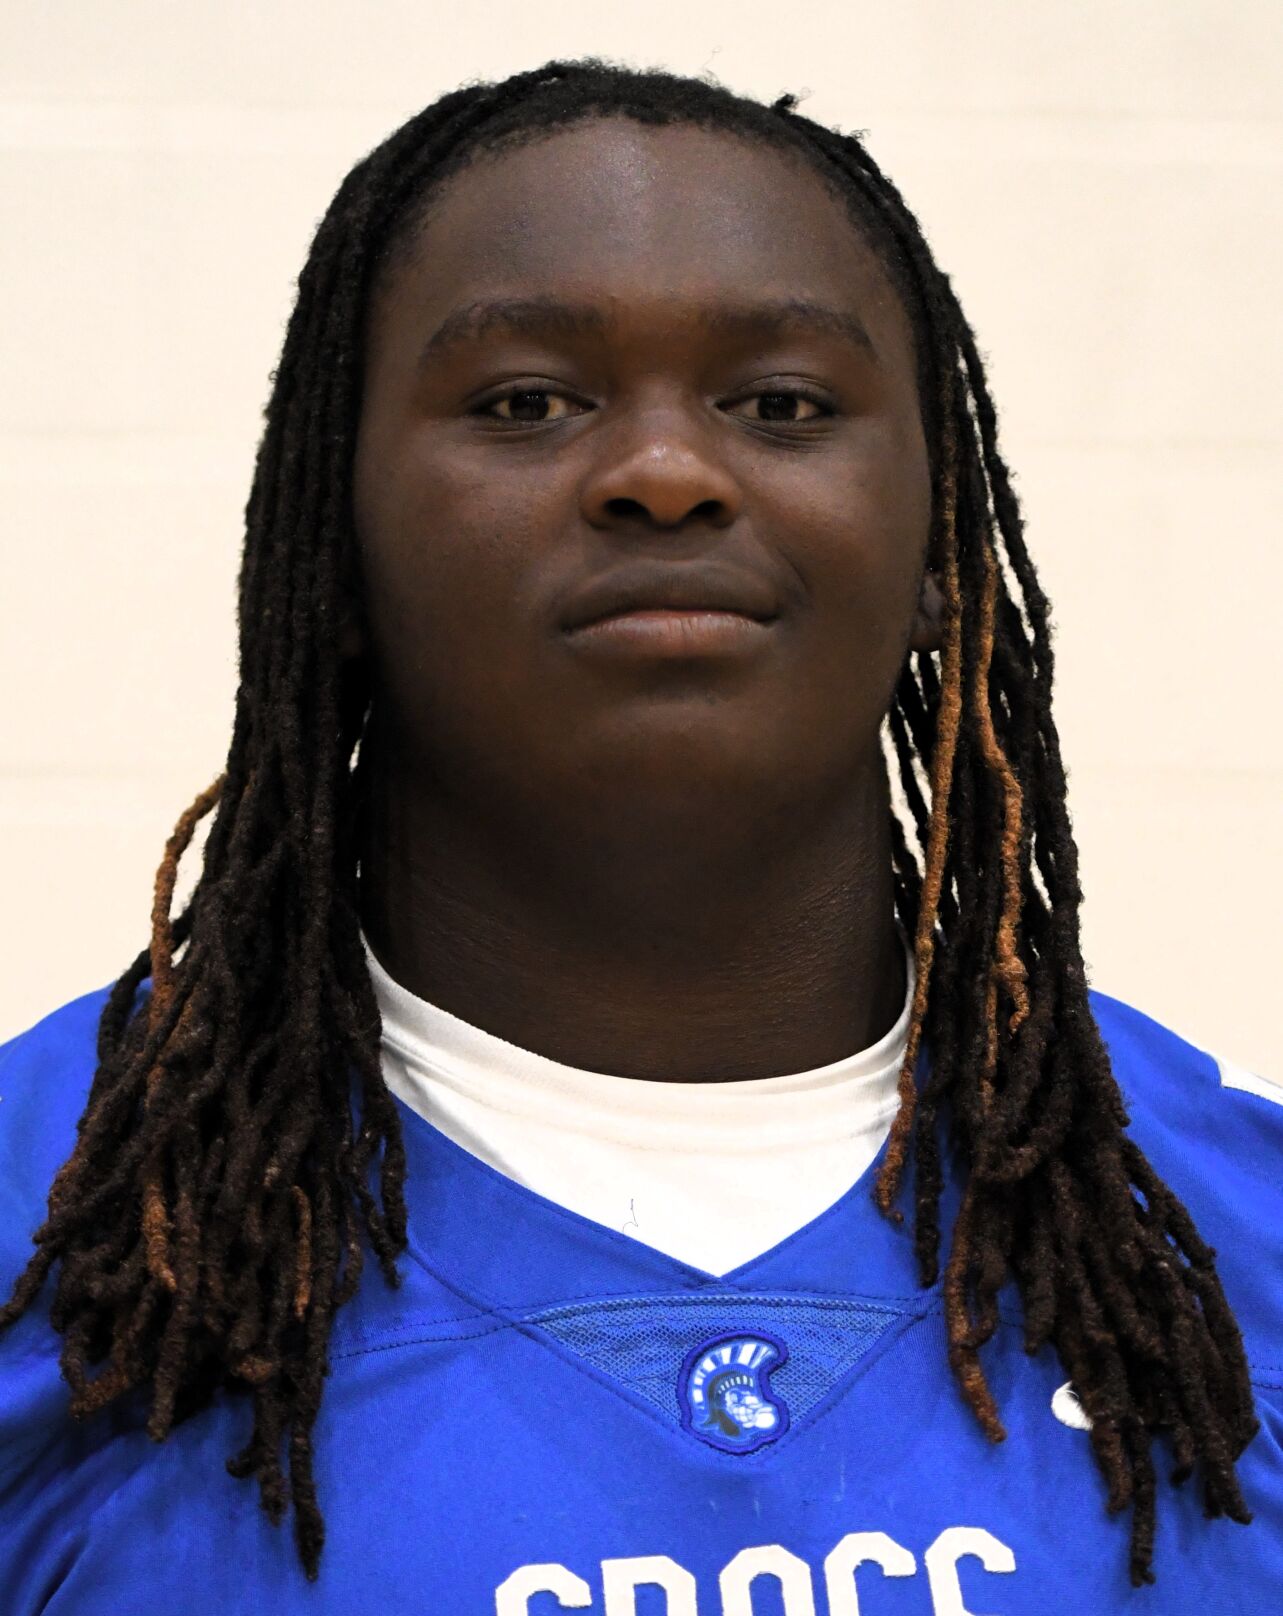 Berkeley County School District Football Players Selected for December All-Star Game